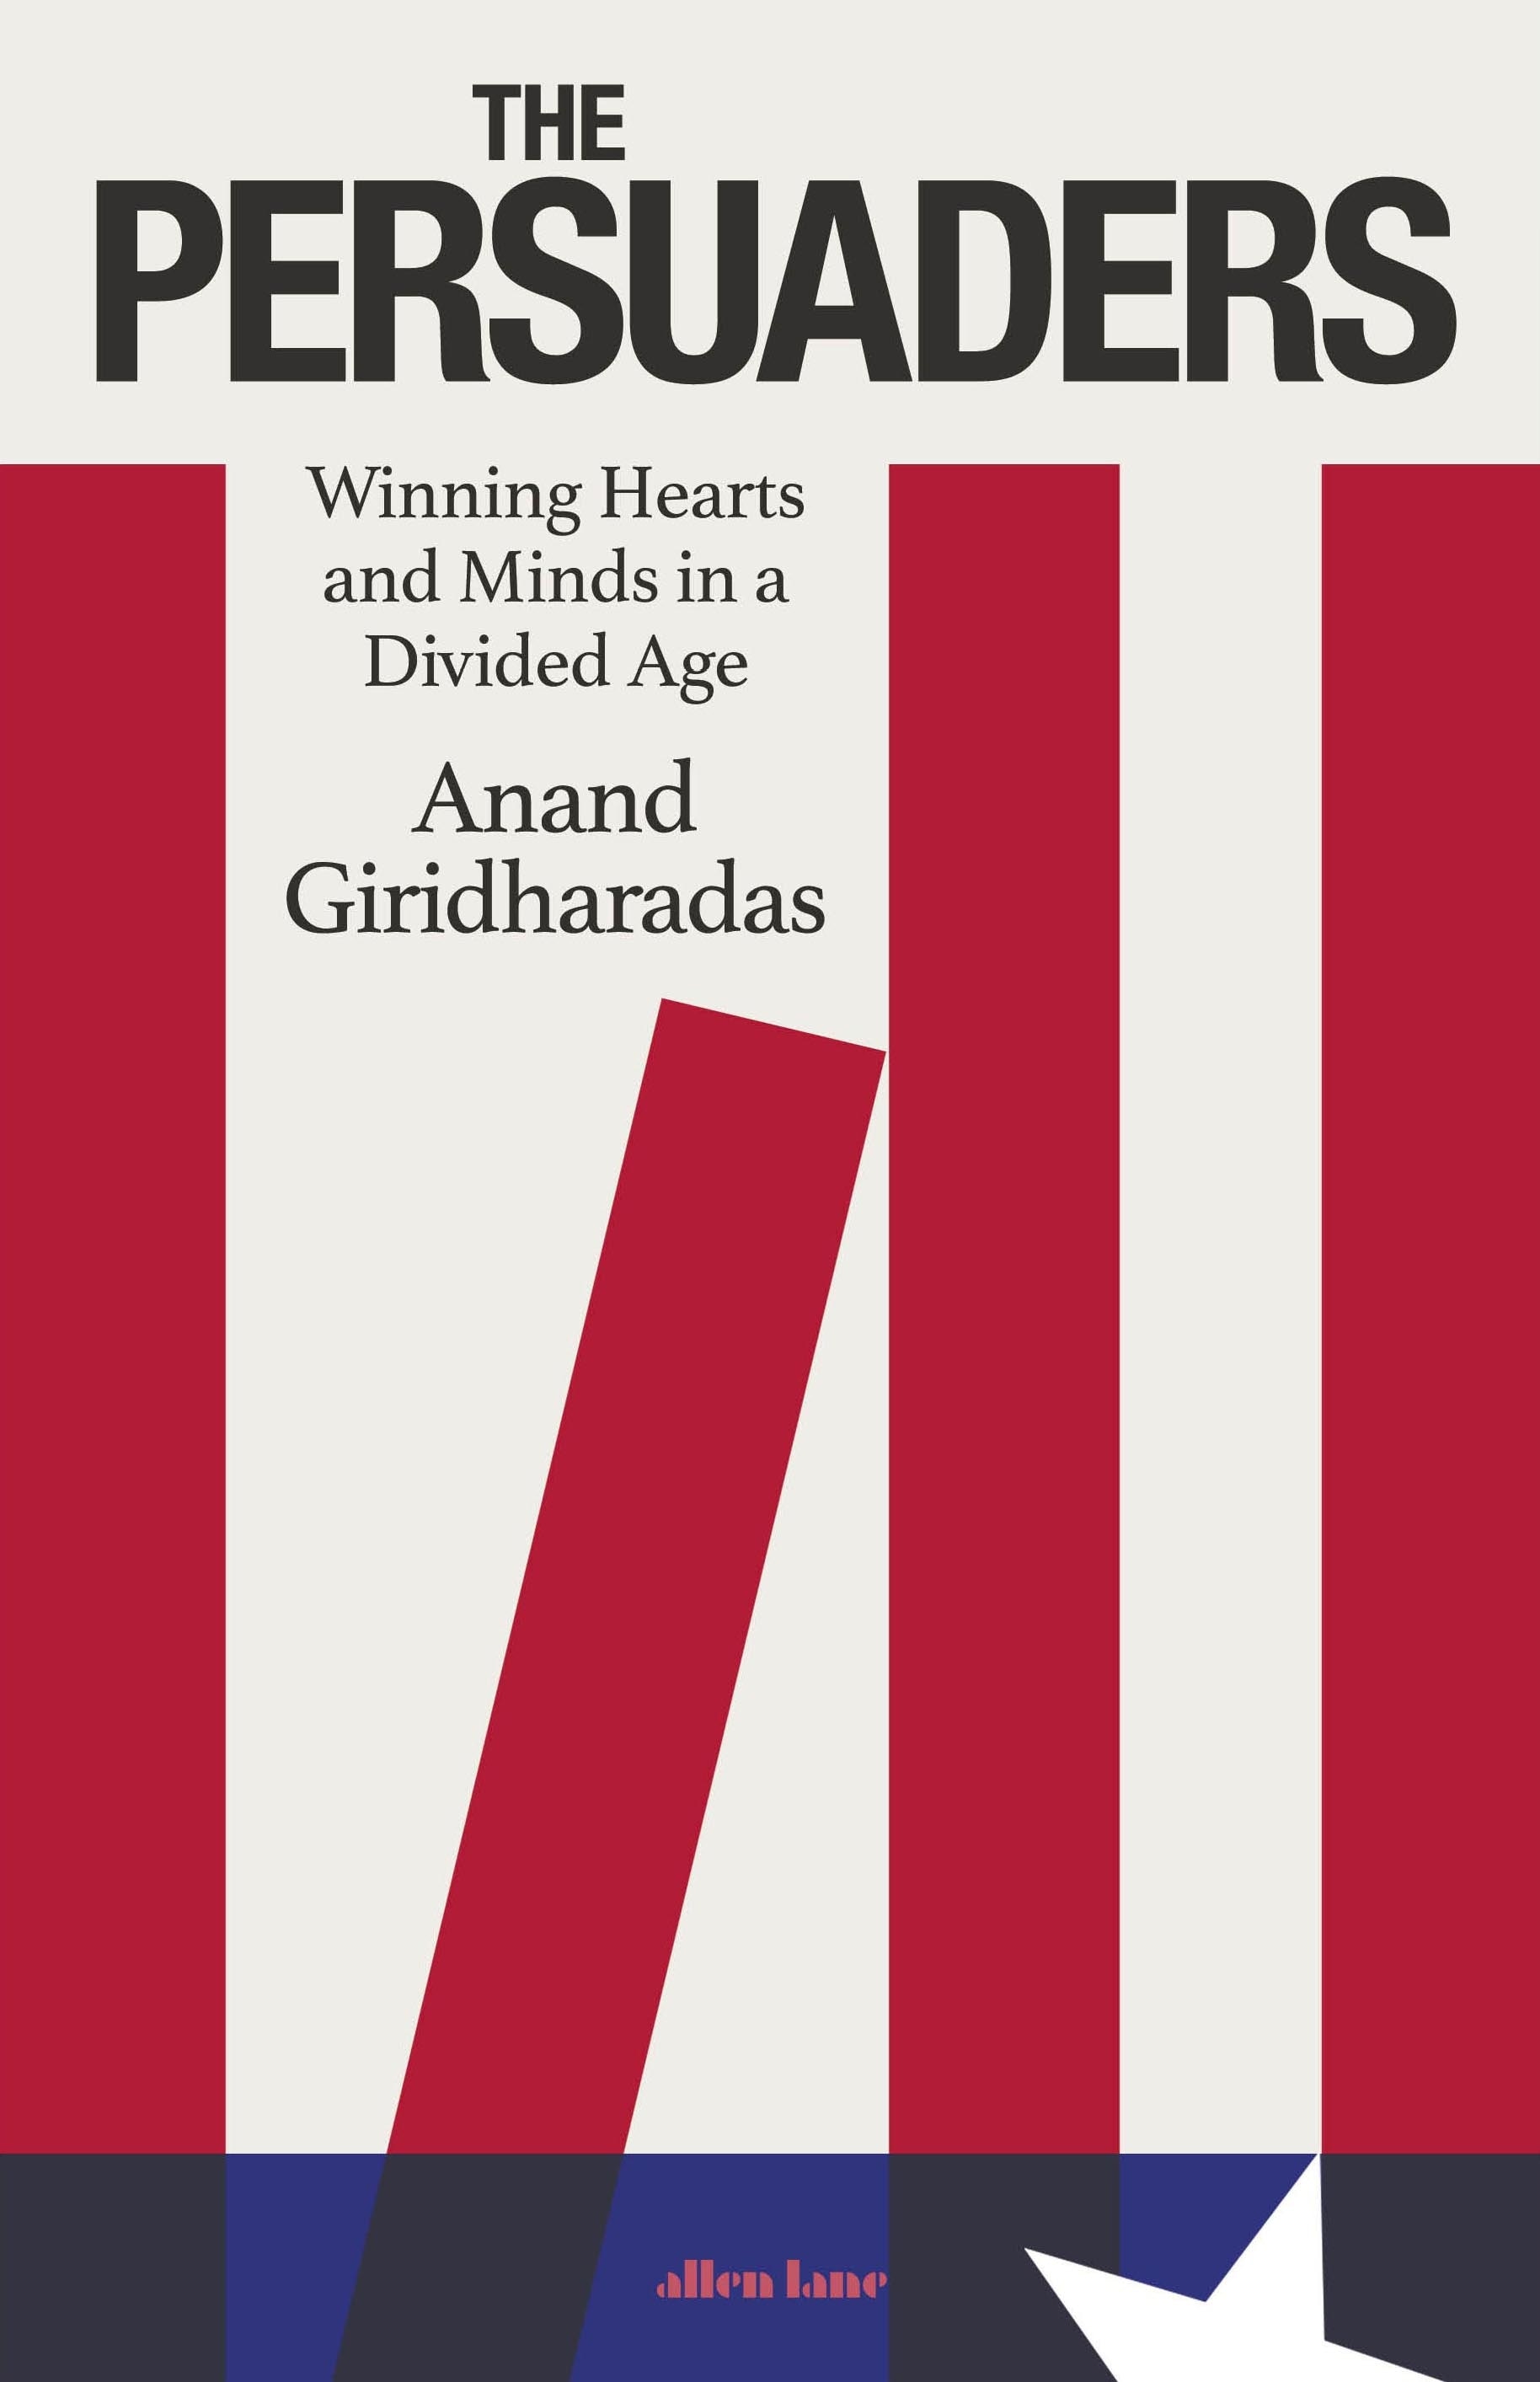 Book “The Persuaders” by Anand Giridharadas — October 18, 2022